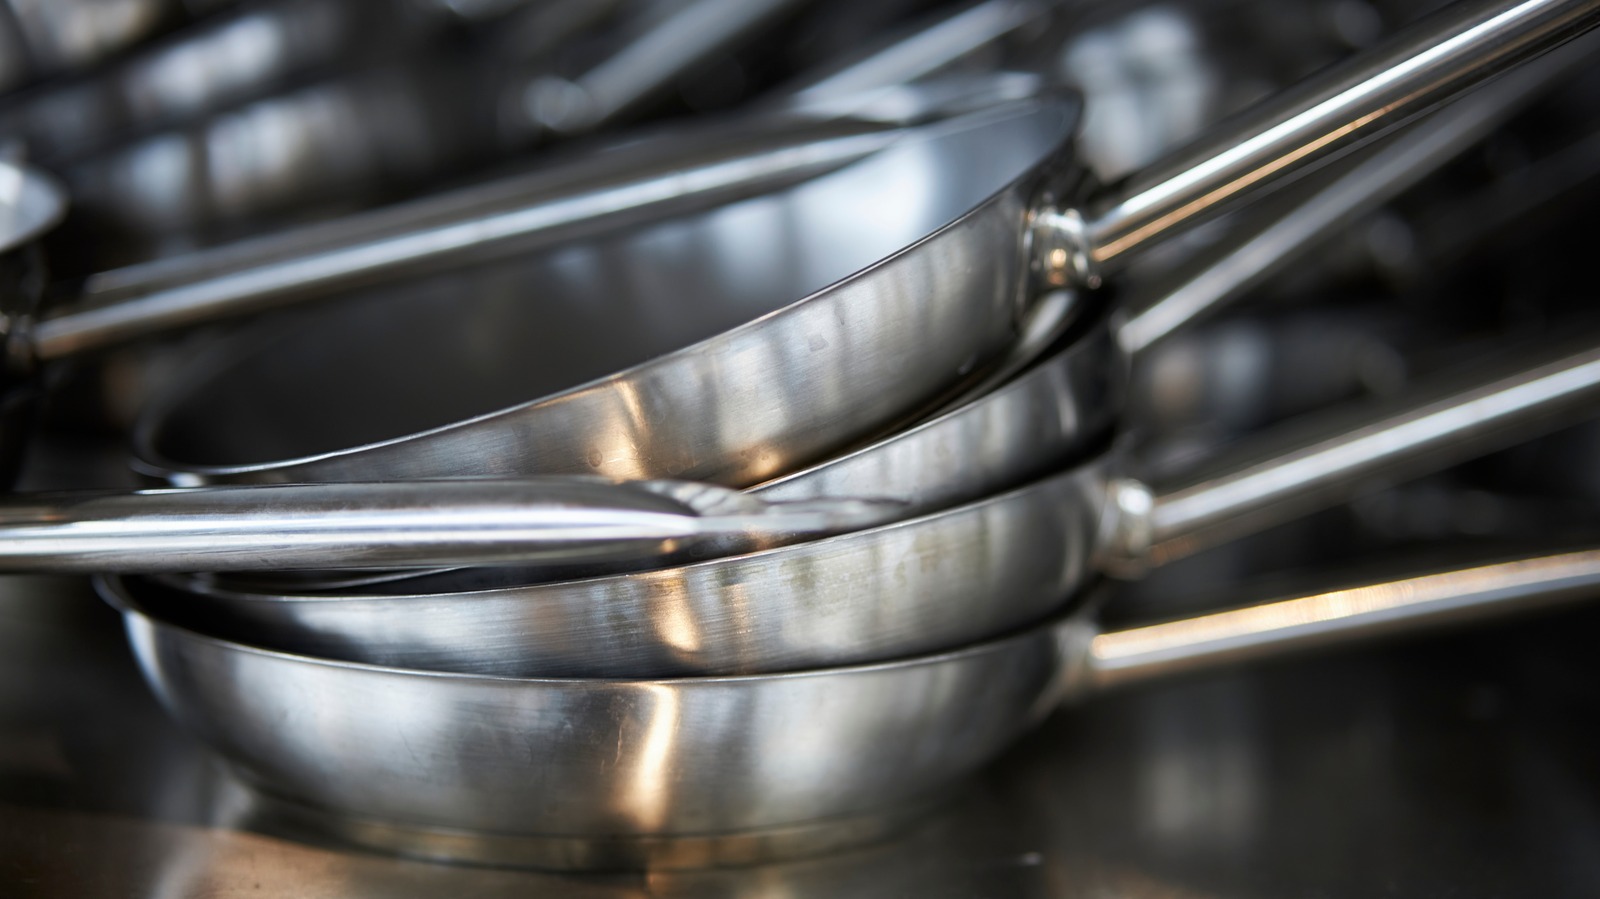 https://www.foodrepublic.com/img/gallery/why-you-shouldnt-stack-pans-when-you-store-them/l-intro-1701357137.jpg